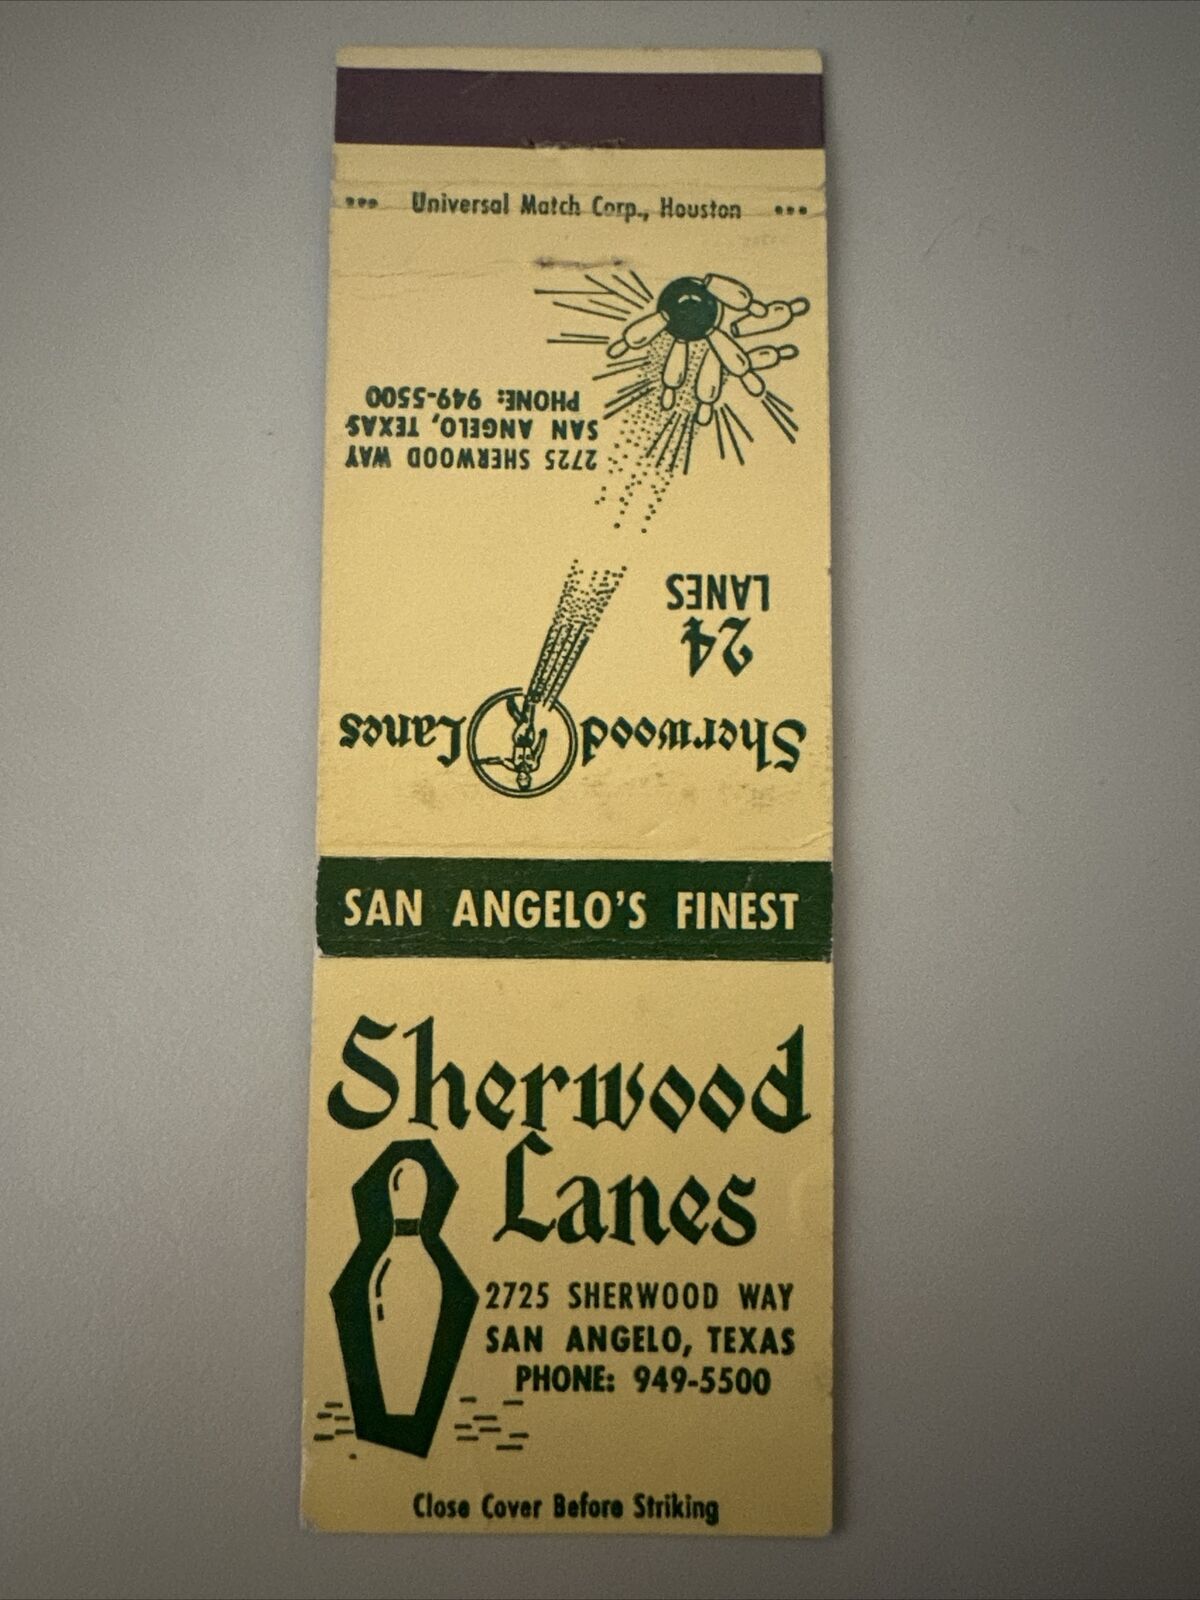 Vintage 1960s Sherwood Lanes Bowling Alley Matchbook Cover Texas Mid-Century 